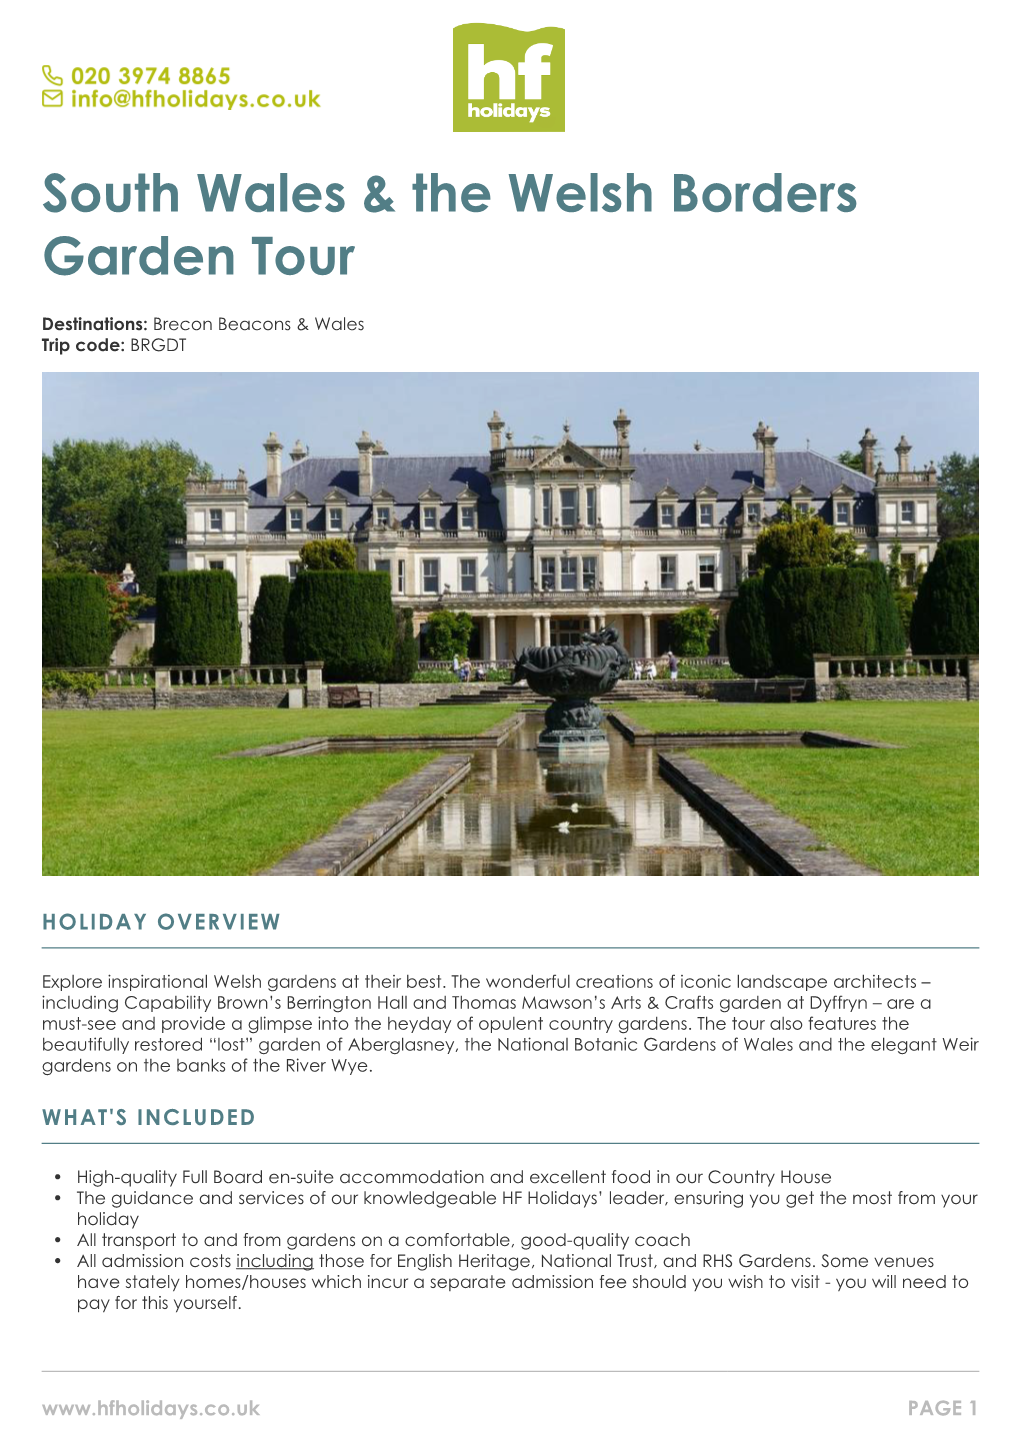 South Wales & the Welsh Borders Garden Tour